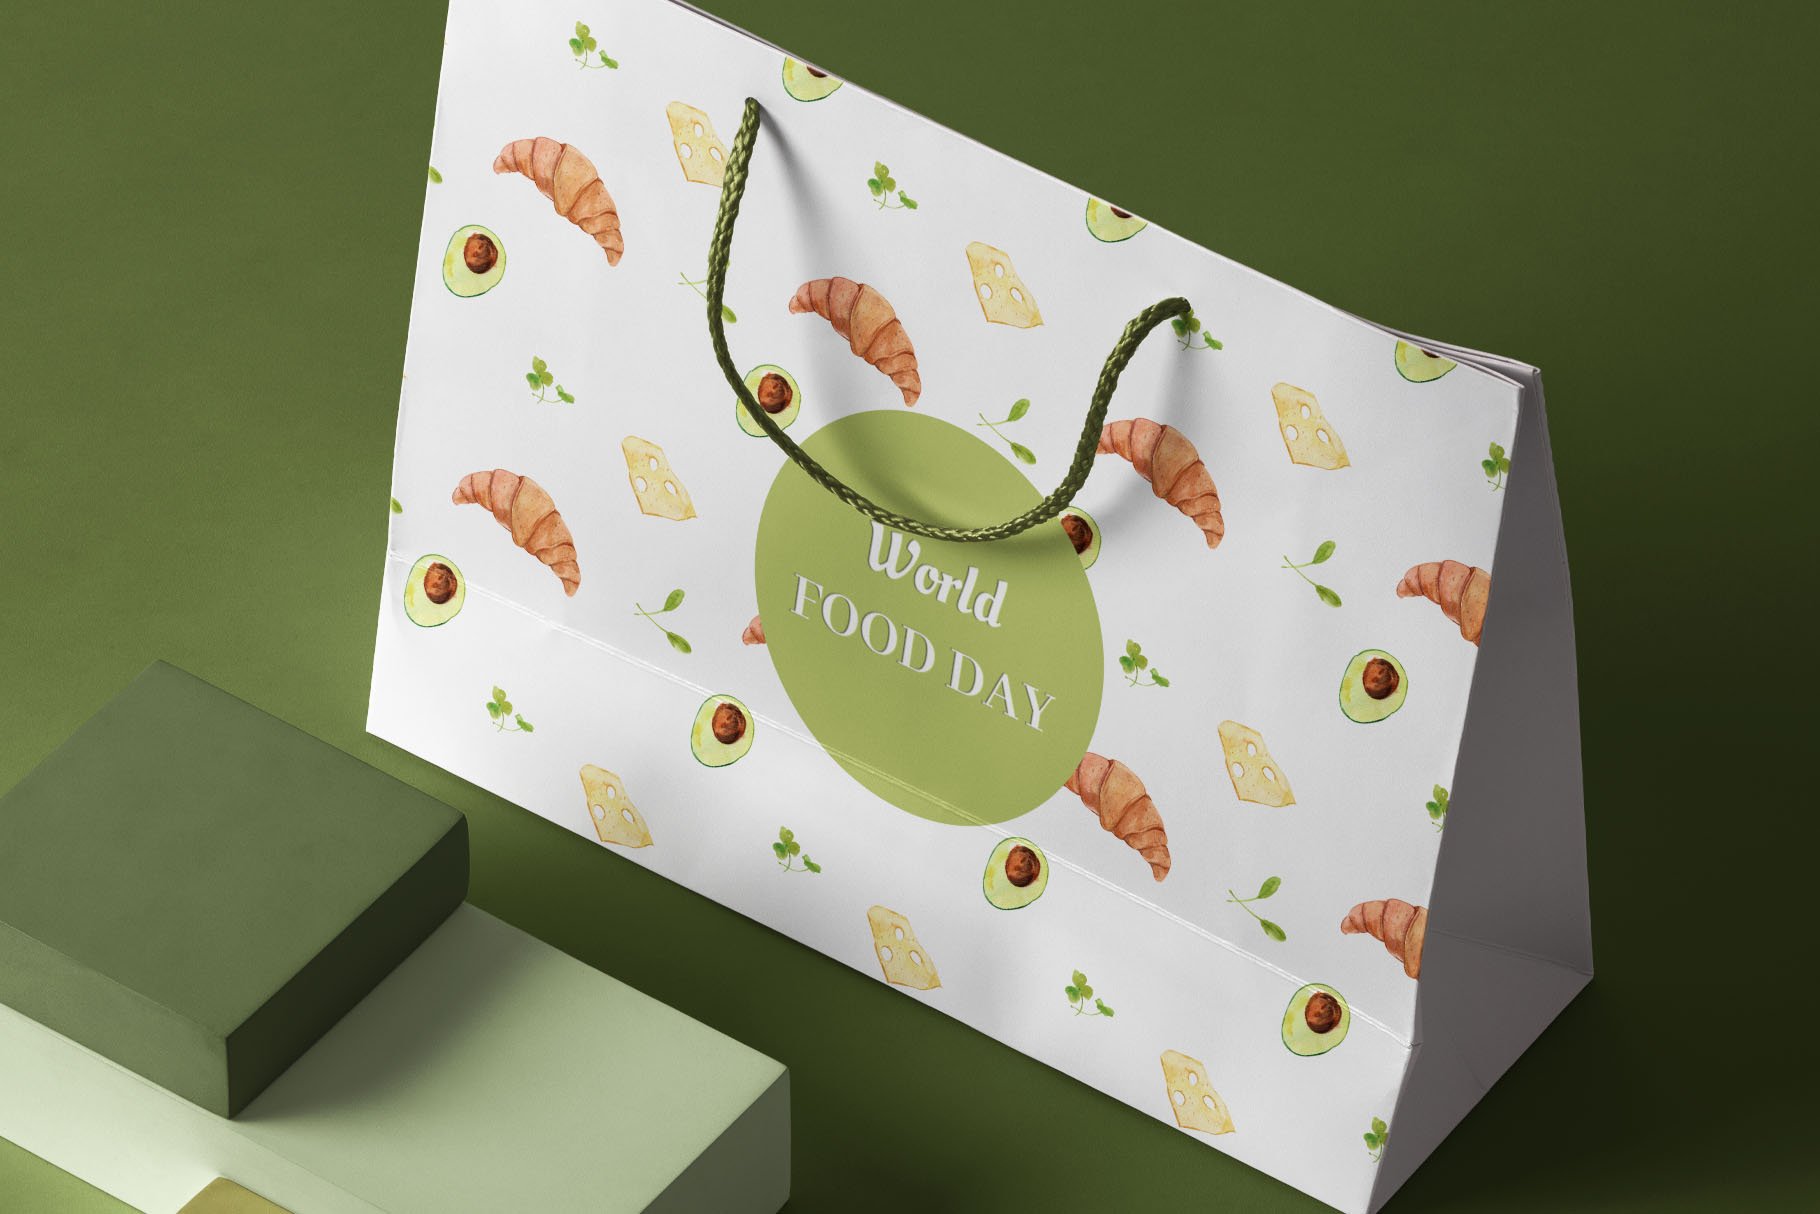 Paper bag with the world food day illustration.